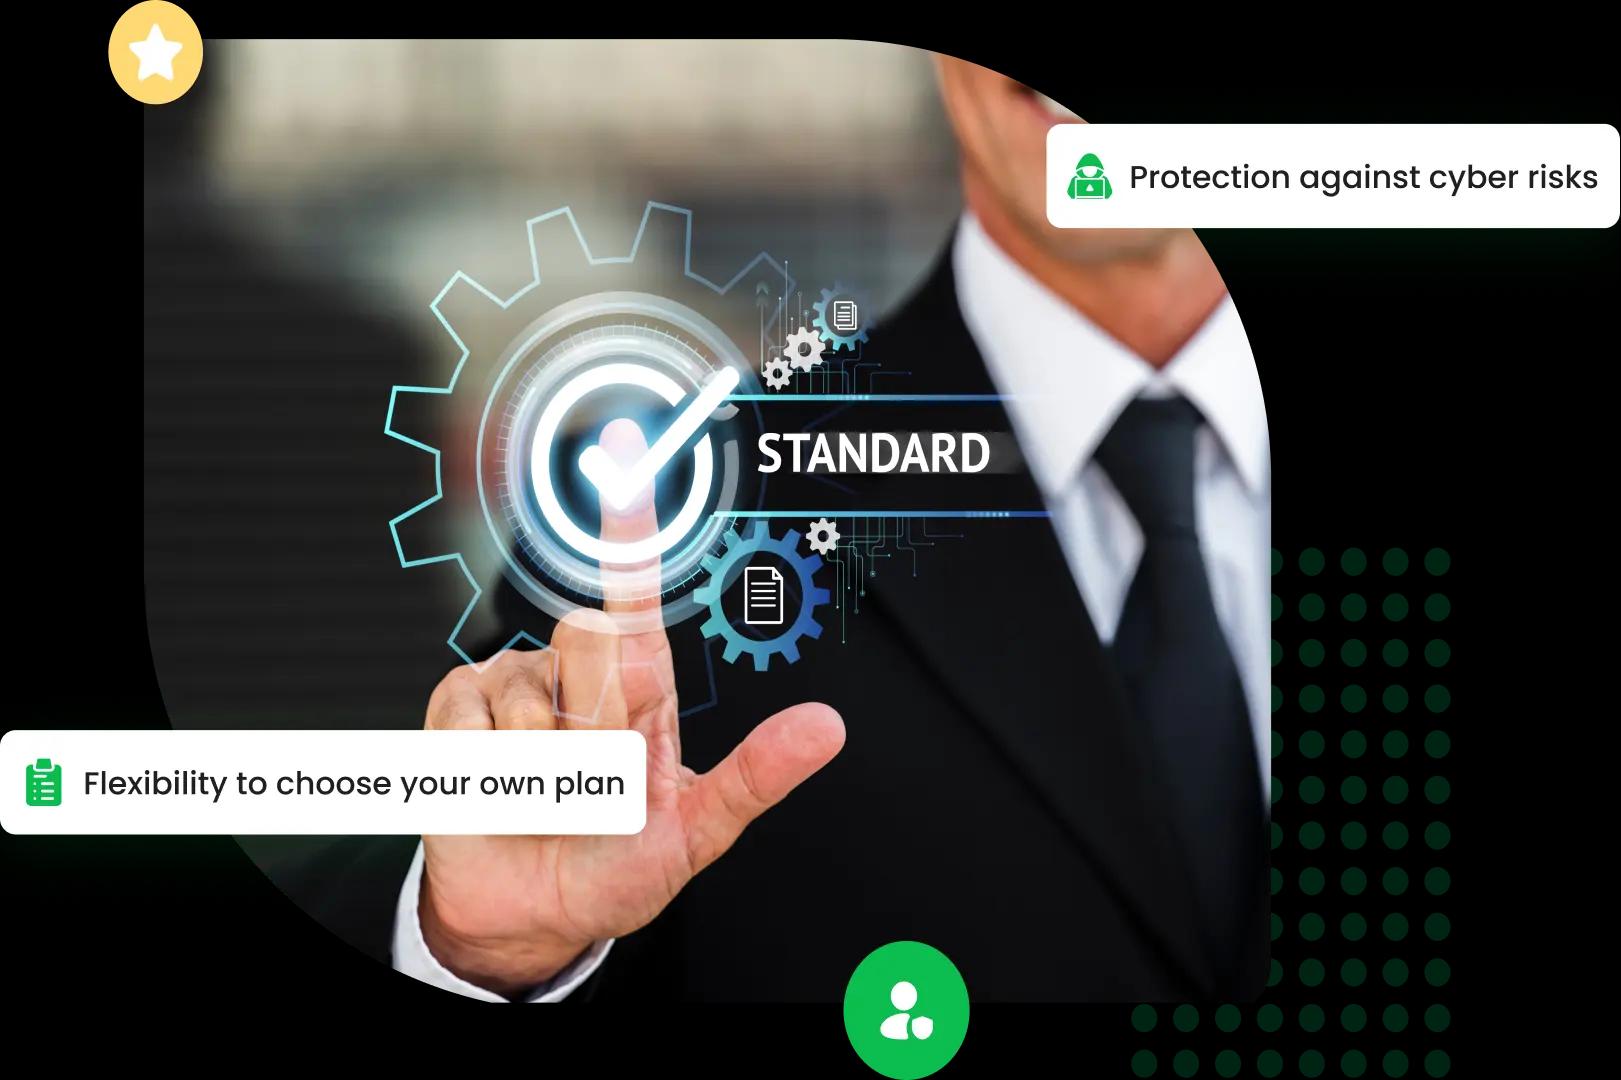 A corporate individual in a suit touches a digital interface with options, choosing the 'STANDARD' level of service, illustrating the tailored and flexible compliance service plans offered by Mitigata.